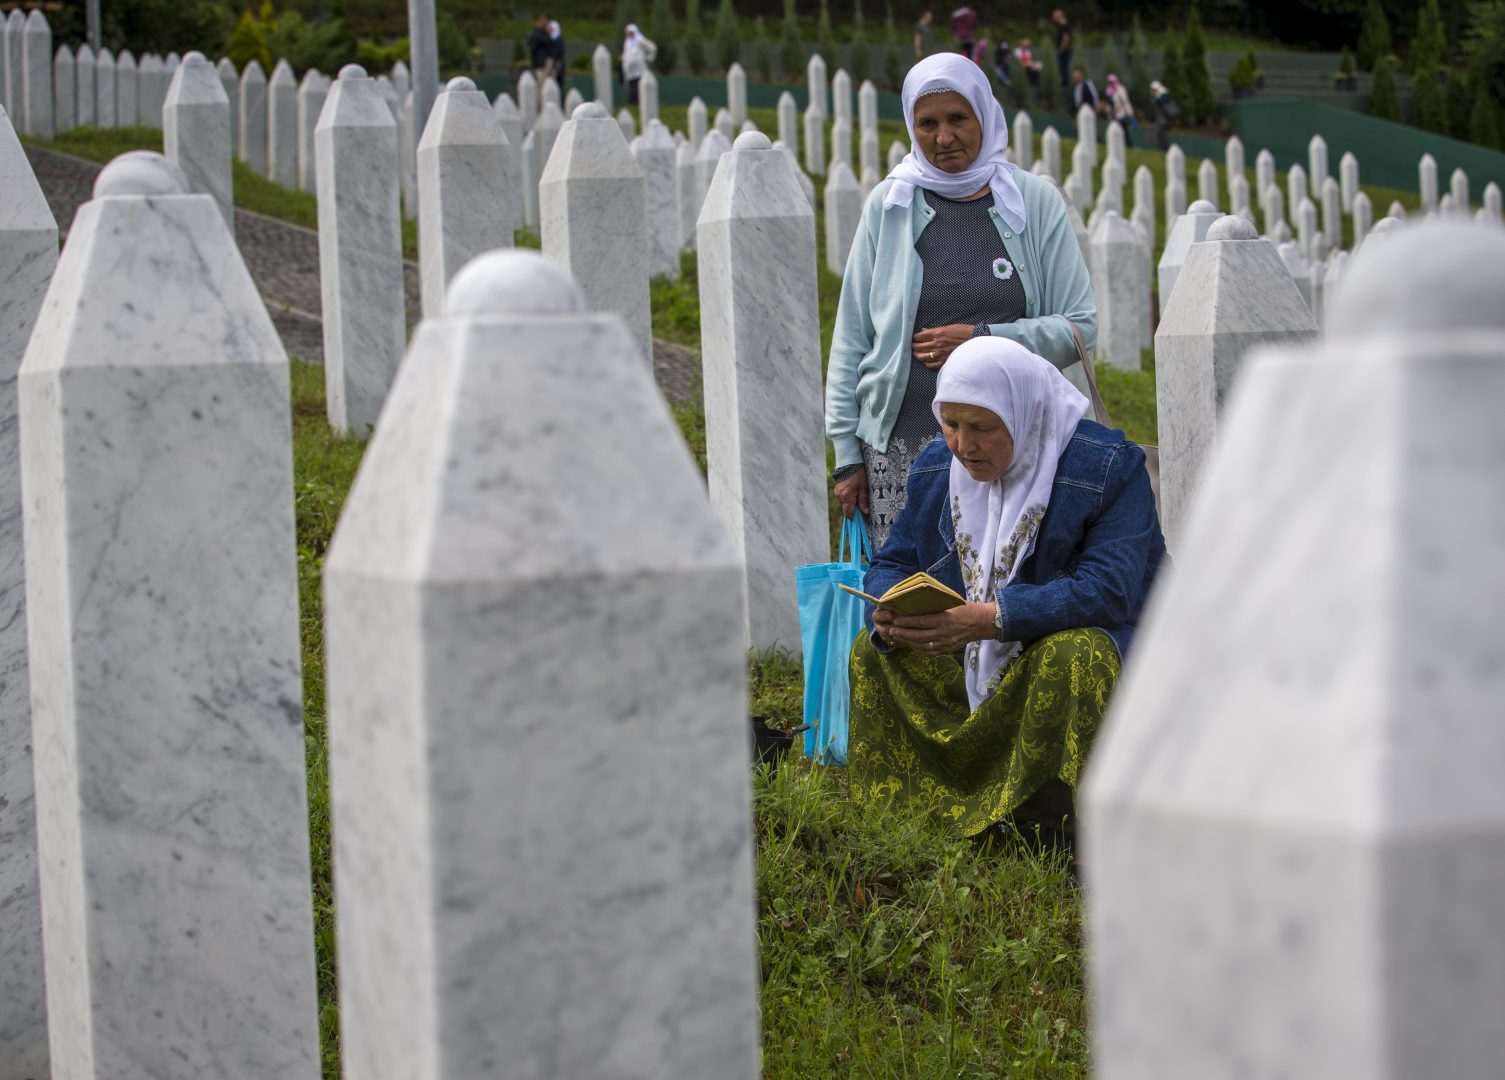 Relatives of victims pray as they visit the memorial cemetery in Potocari near Srebrenica, Bosnia, Wednesday, July 10, 2019. The remains of 33 victims of Srebrenica massacre will be buried on July 11, 2019, 24 years after Serb troops overran the eastern Bosnian Muslim enclave of Srebrenica and executed some 8,000 Muslim men and boys, which international courts have labeled as an act of genocide. 